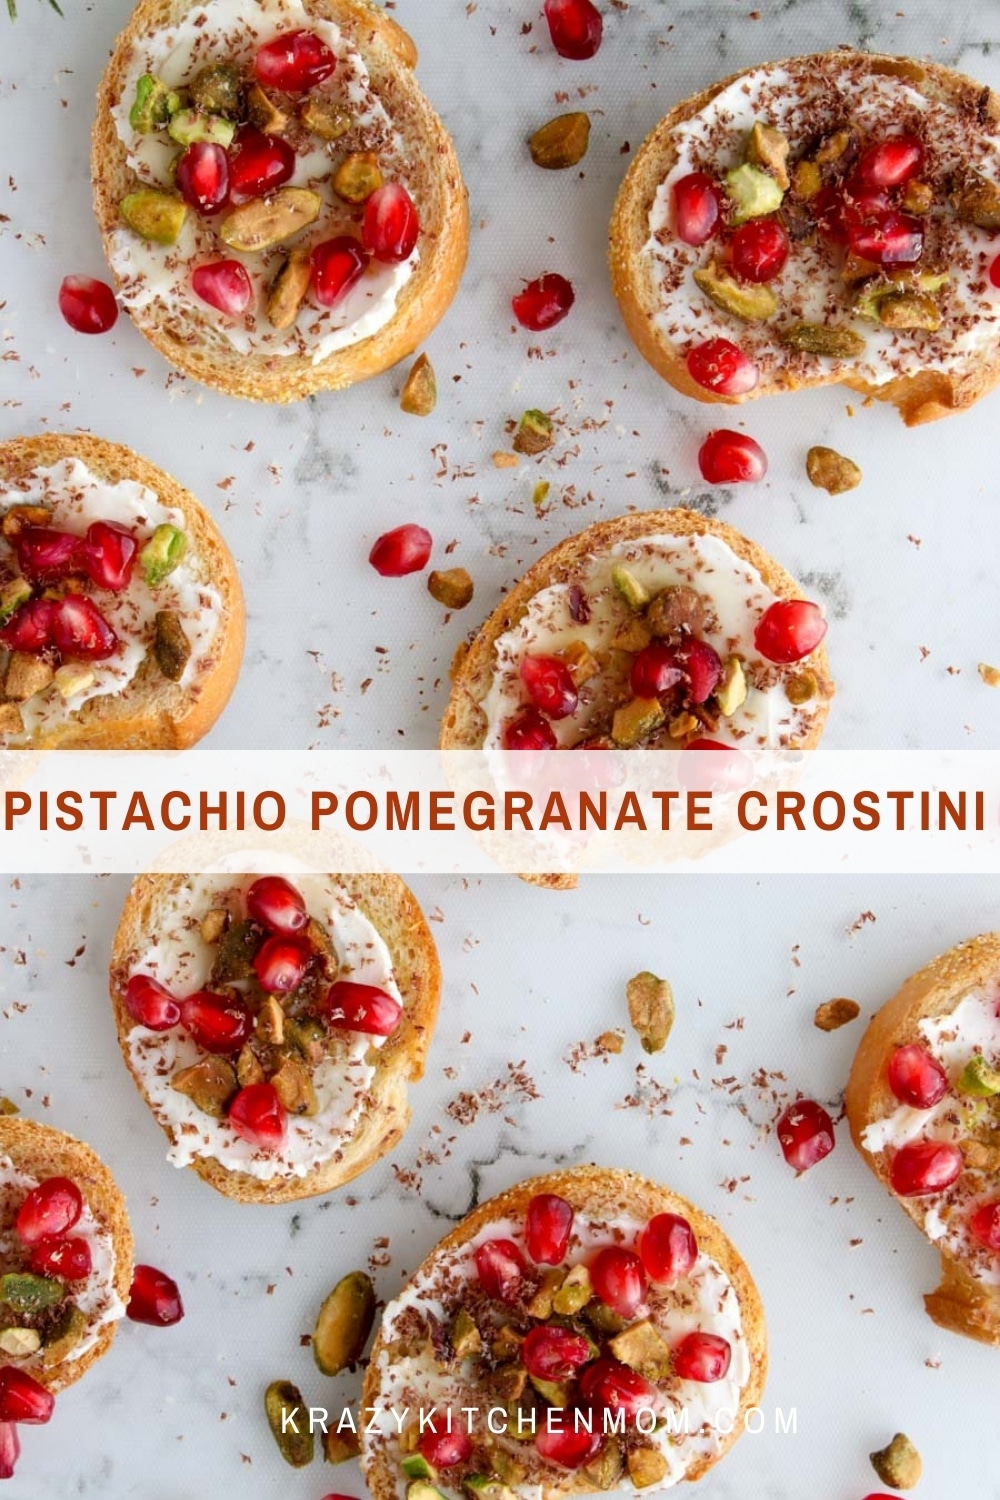 Pistachio pomegranate crostini recipe is one of our favorite holiday appetizers. They are crunch, nutty, and sweet with every bite. via @krazykitchenmom